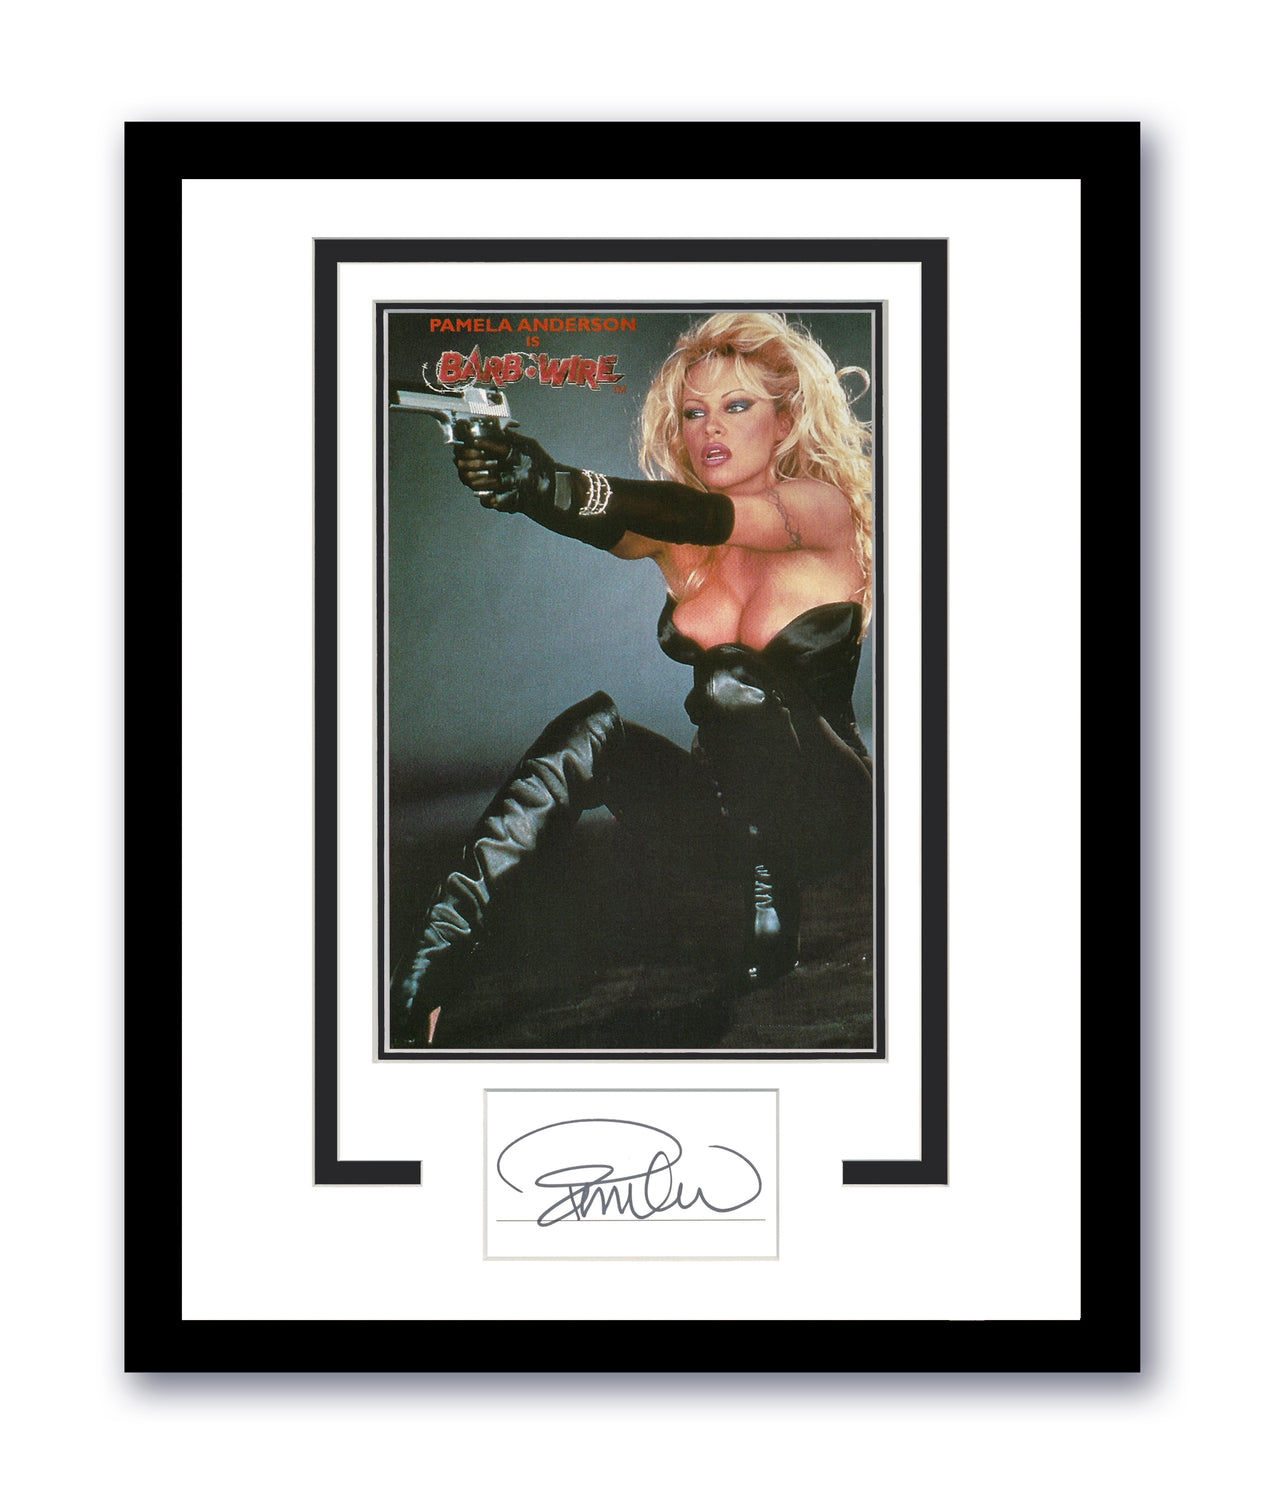 Pamela Anderson Signed Cut 11x14 Barbwire Autographed Authentic ACOA